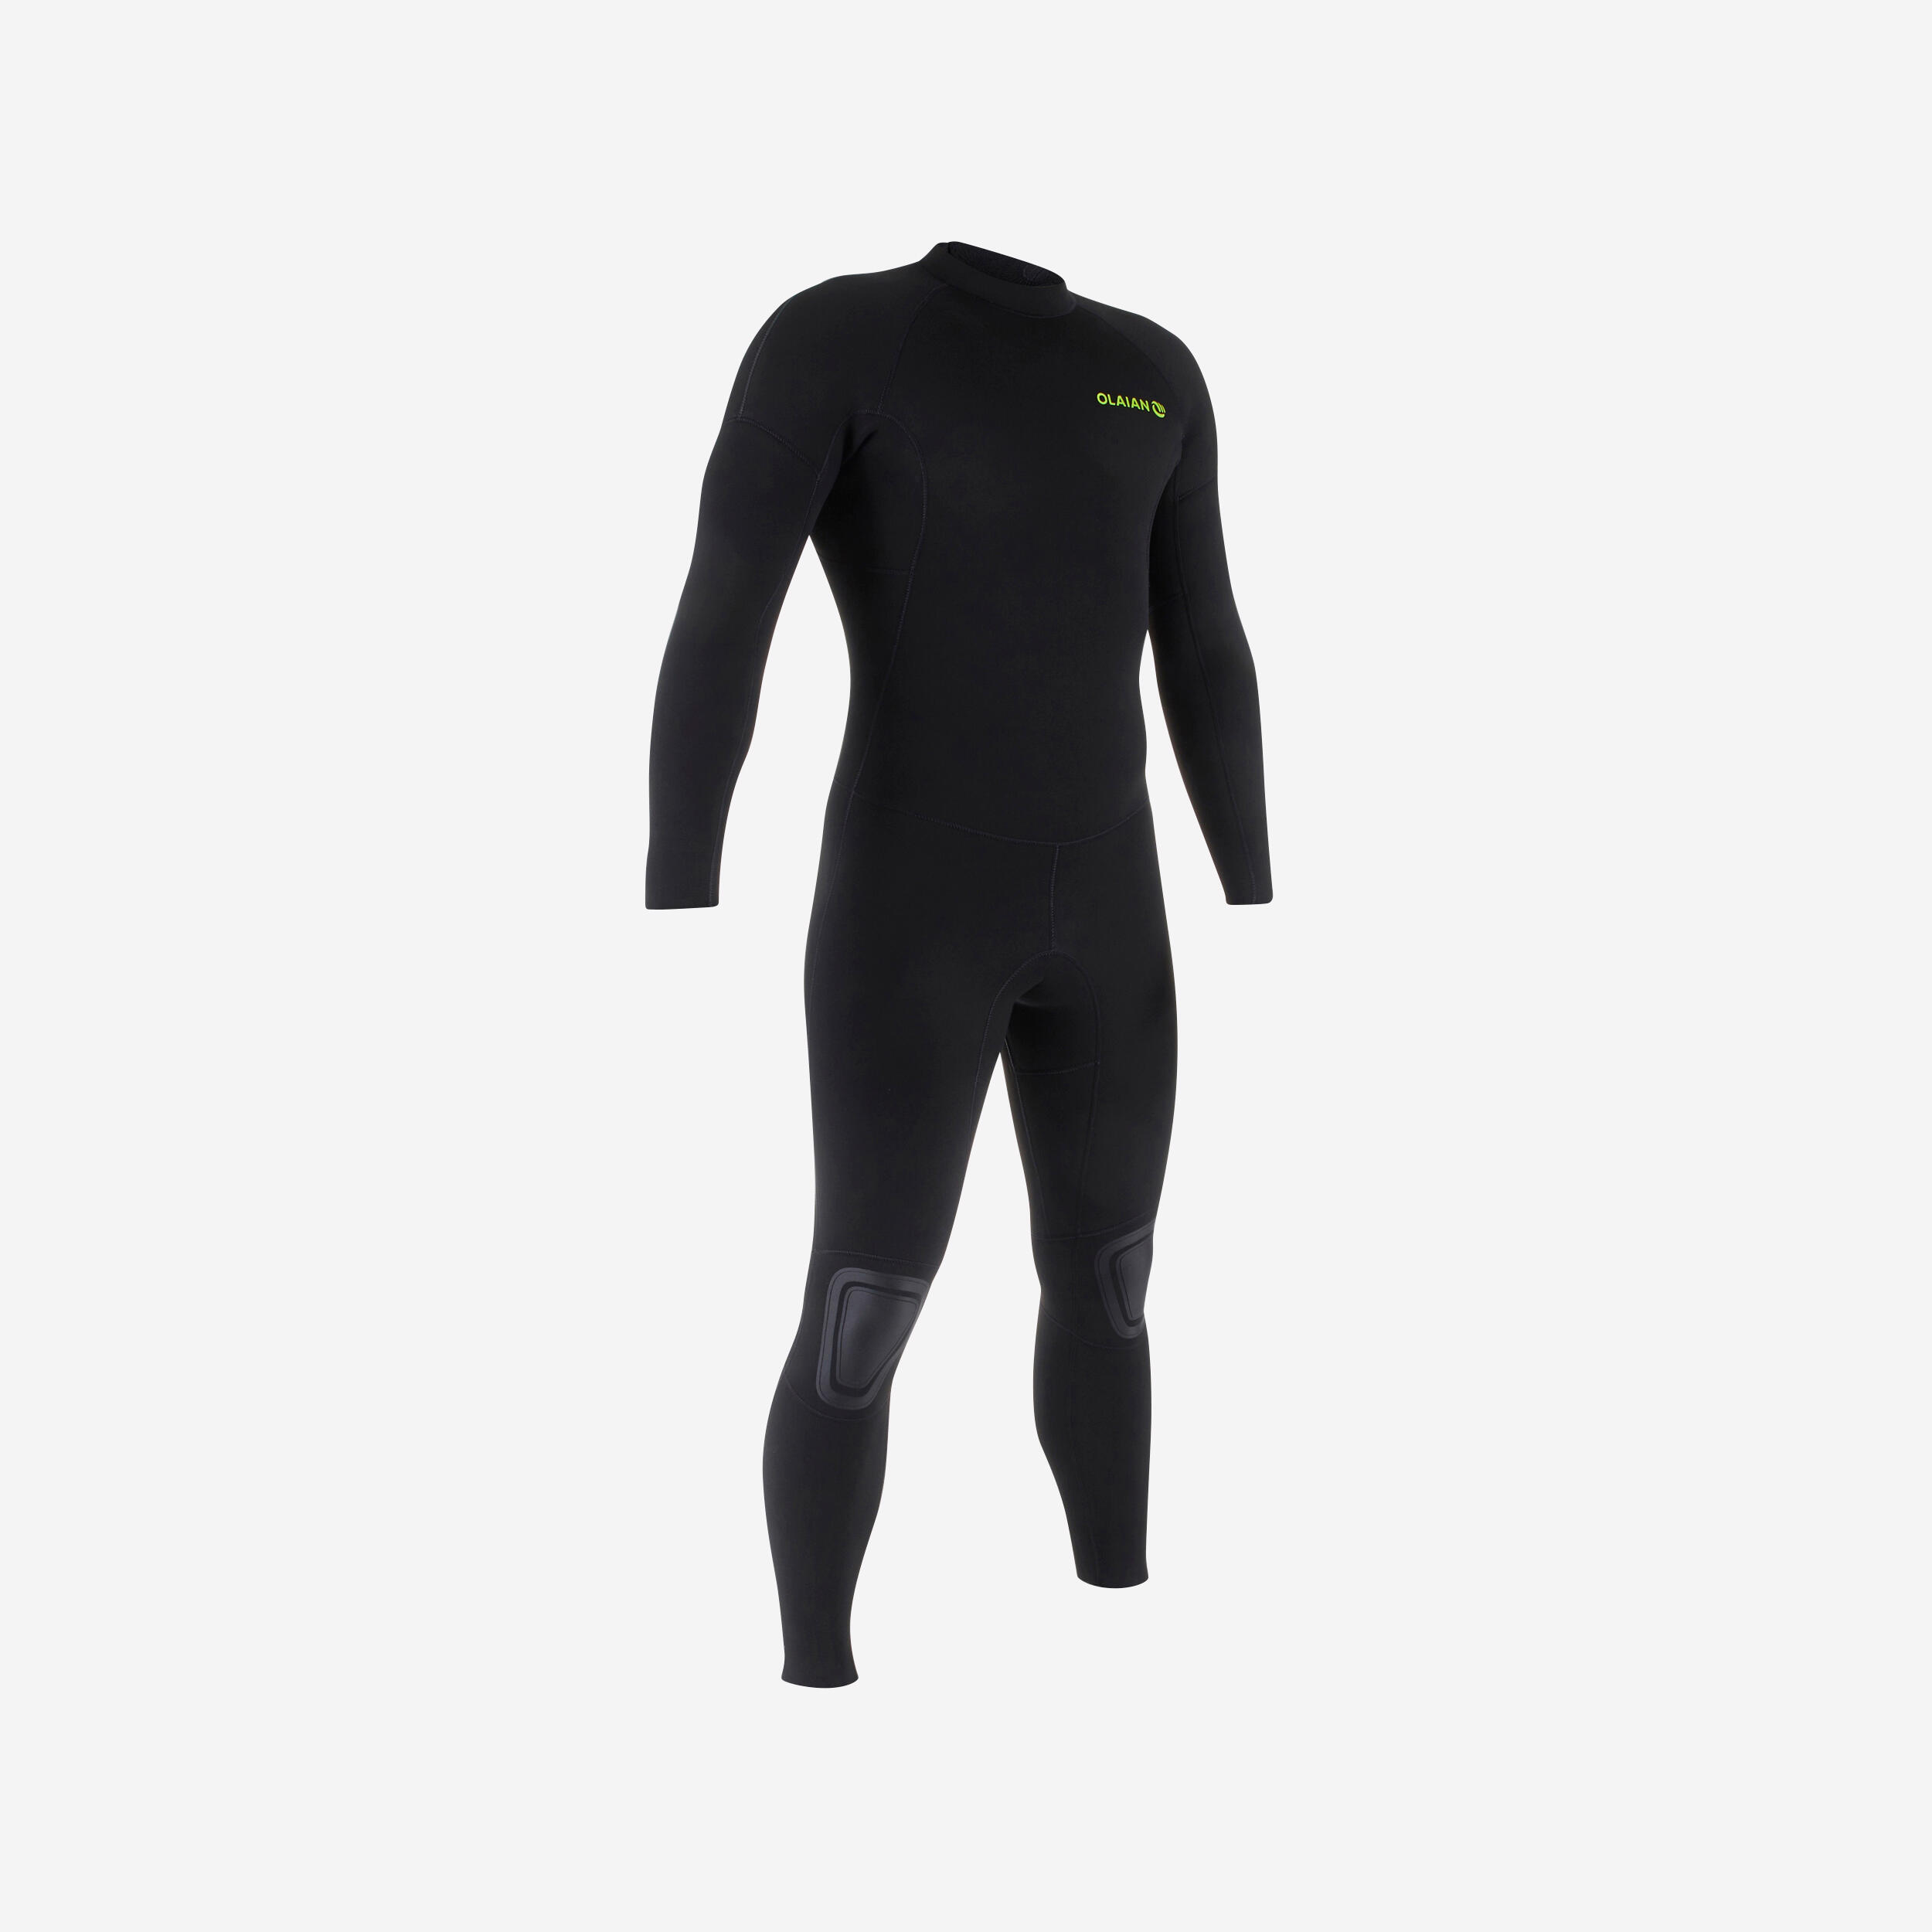 Men's Surfing Wetsuit [FREE SHIPPING]